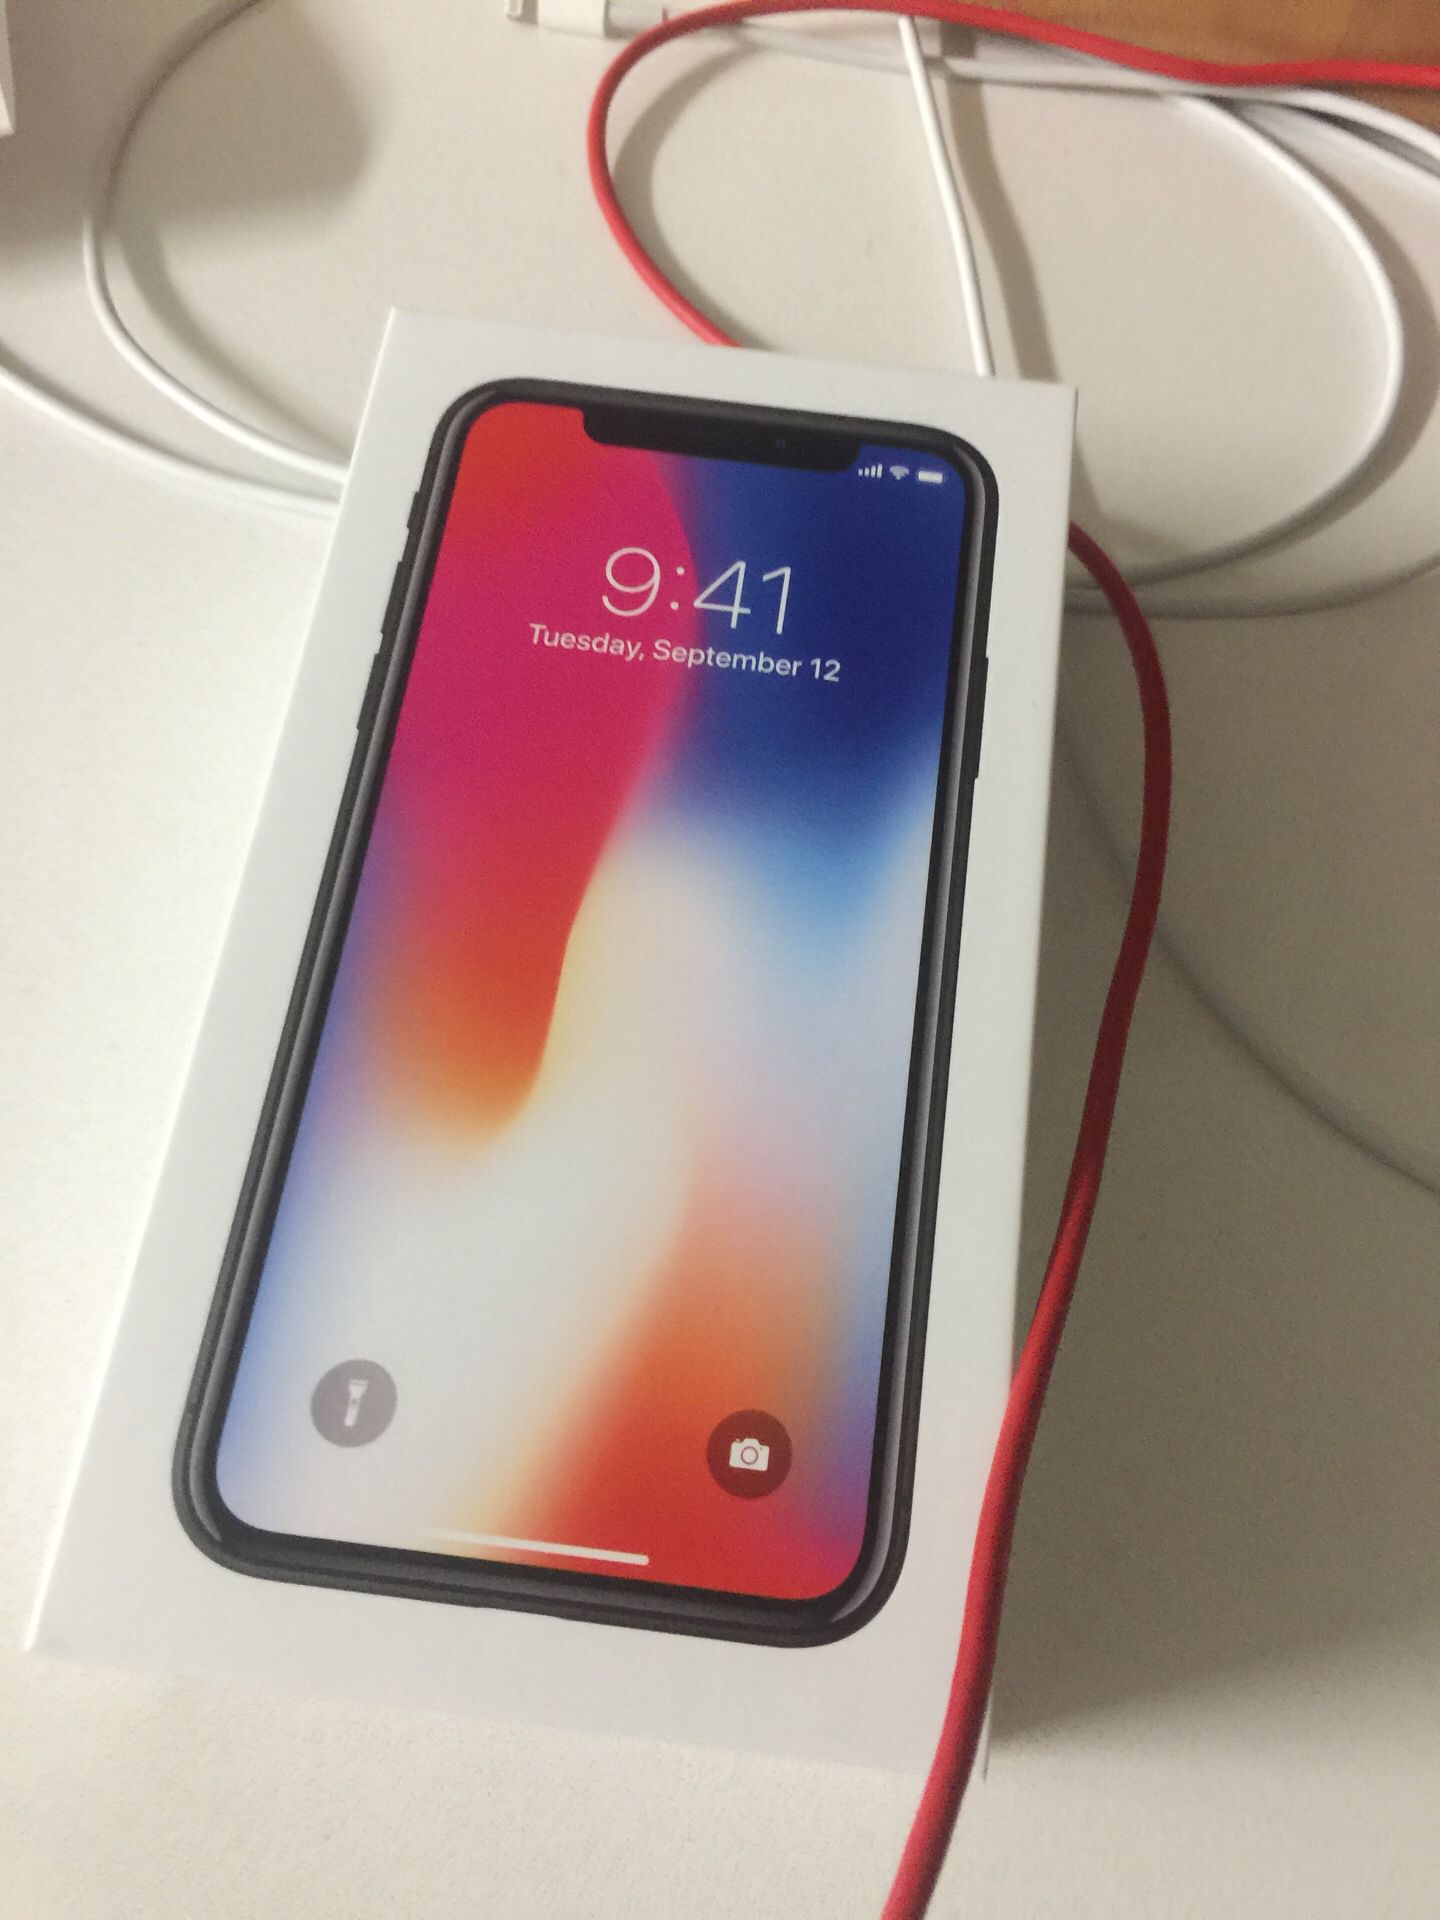 New IPhone X for T-mobile 64gb black